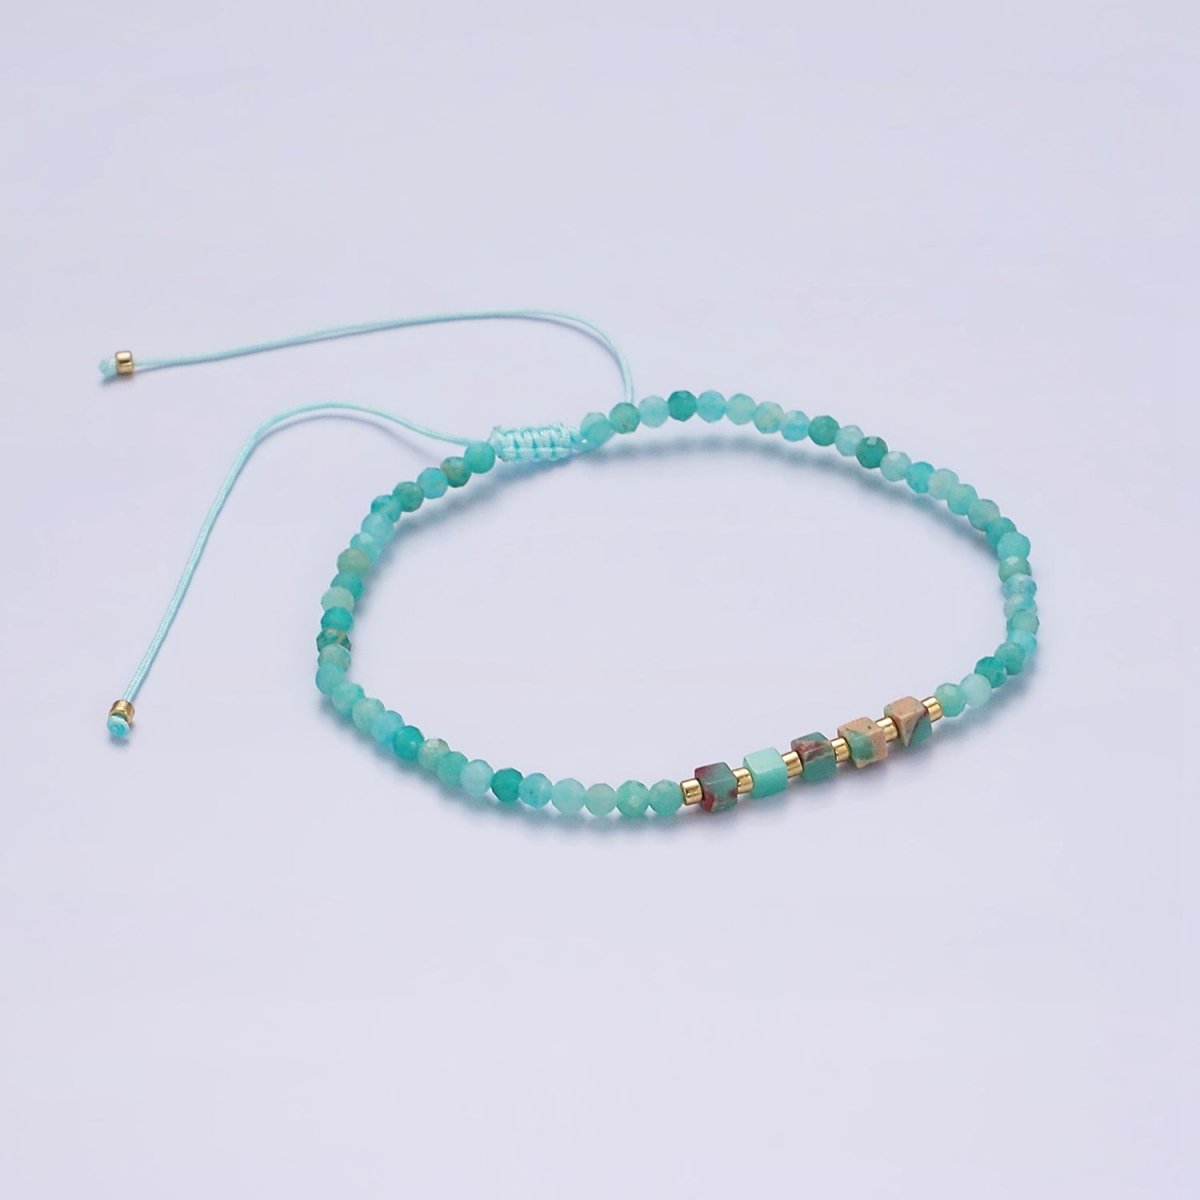 14K Gold Filled Turquoise Multifaceted Turquoise Rope Adjustable Friendship Bracelet | WA-2013 - WA-2015 Clearance Pricing - DLUXCA